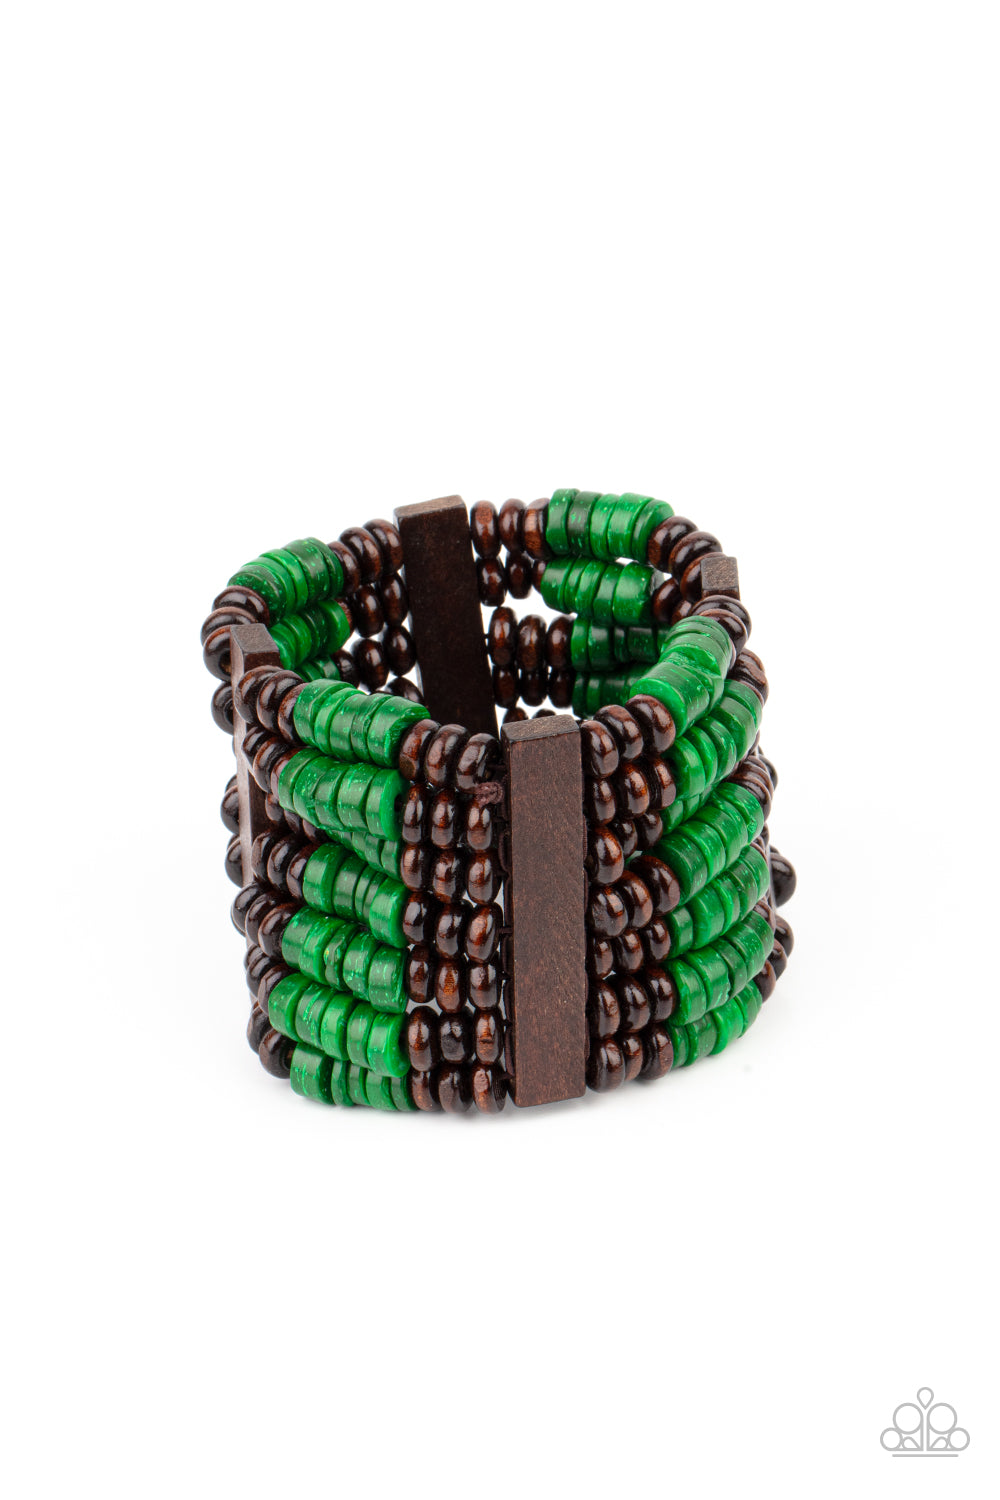 Beaded Bracelet Stretch with Brown and Green Wood Beads - Vacay Vogue